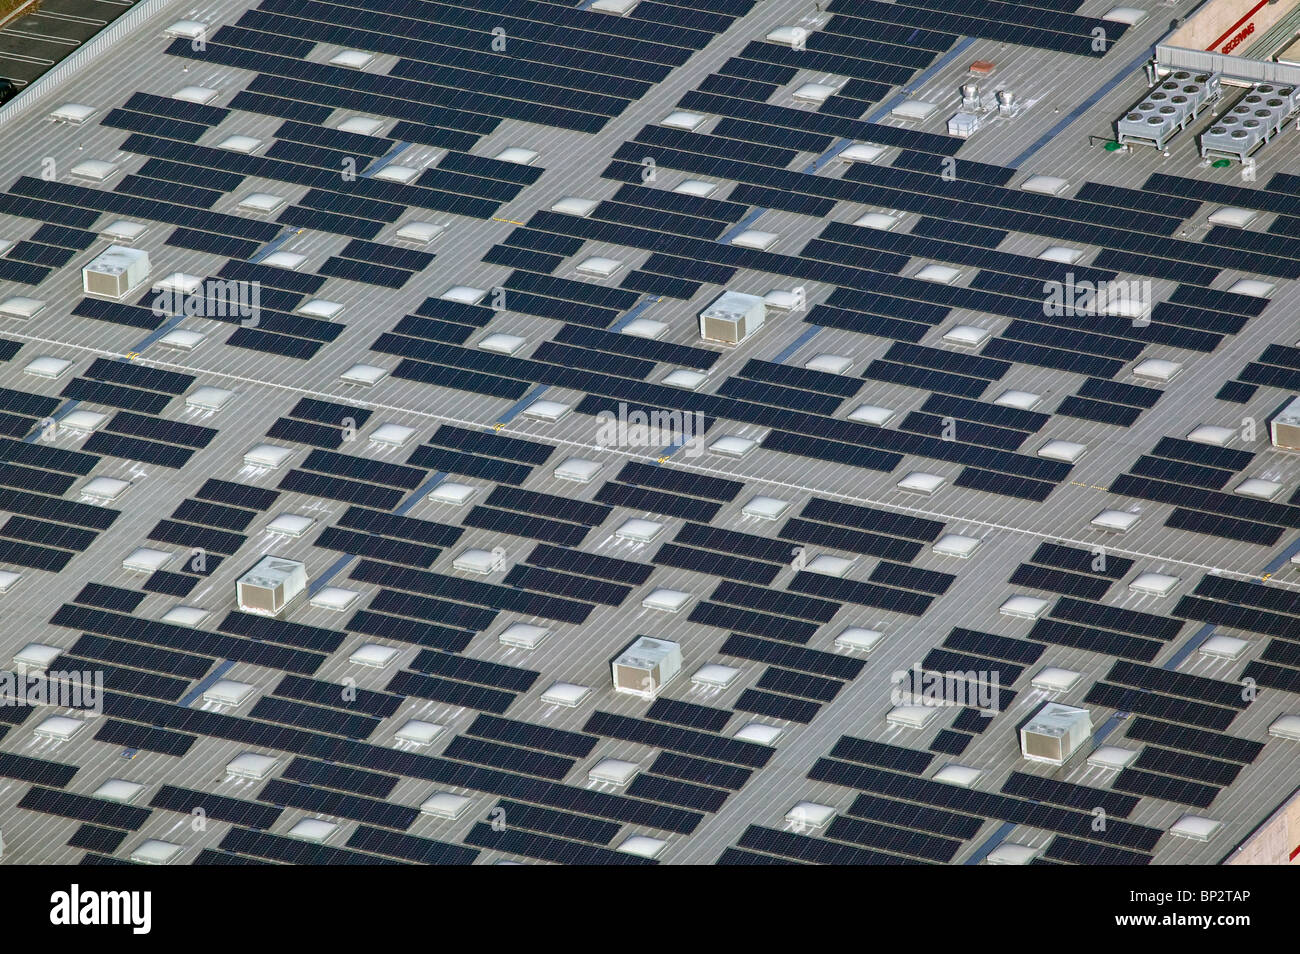 aerial view above solar power panels Costco warehouse rooftop Richmond California Stock Photo